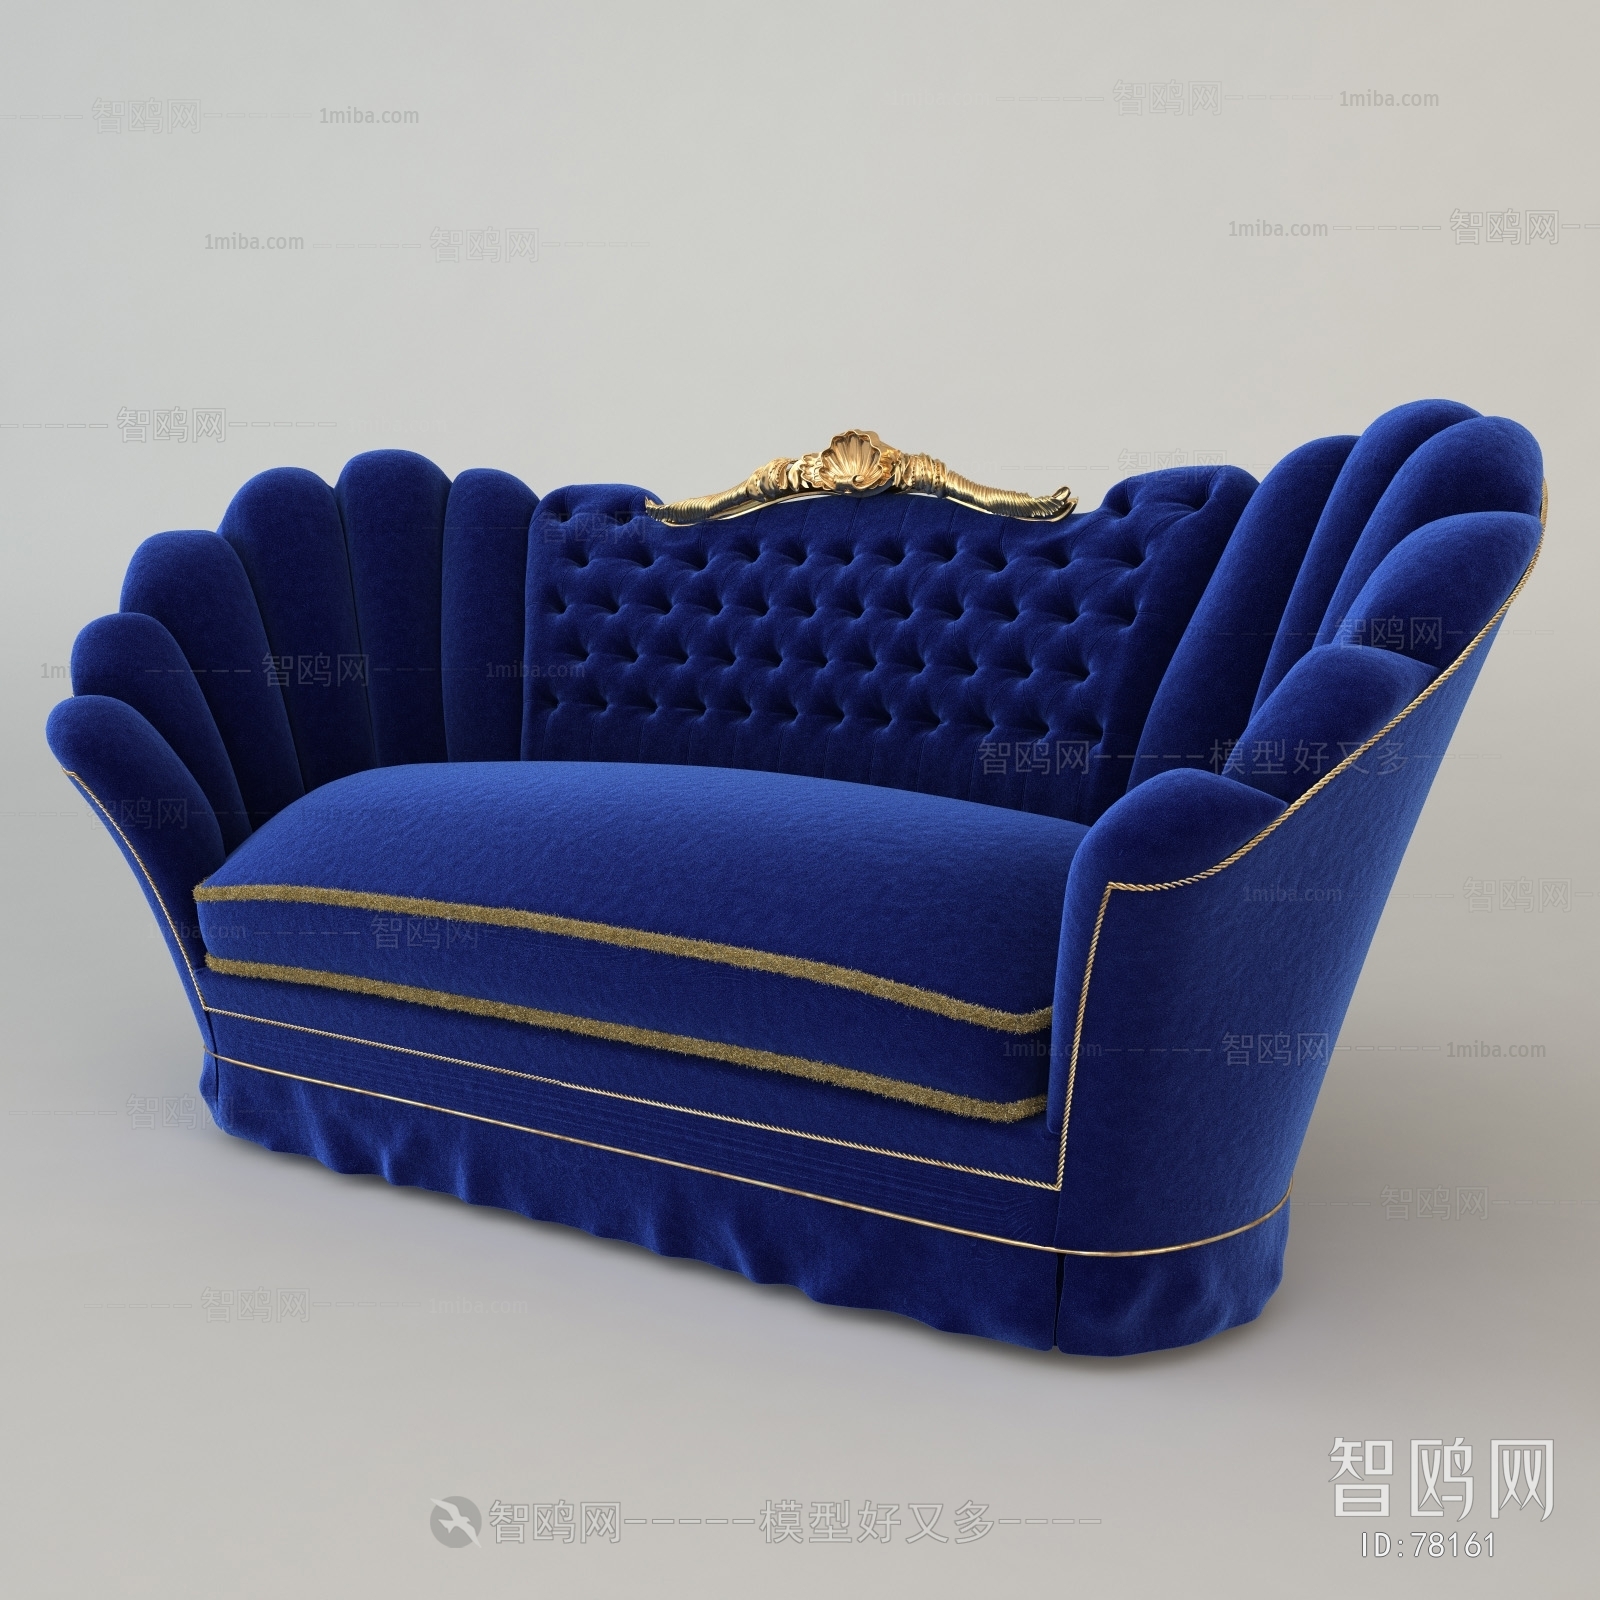 New Classical Style A Sofa For Two